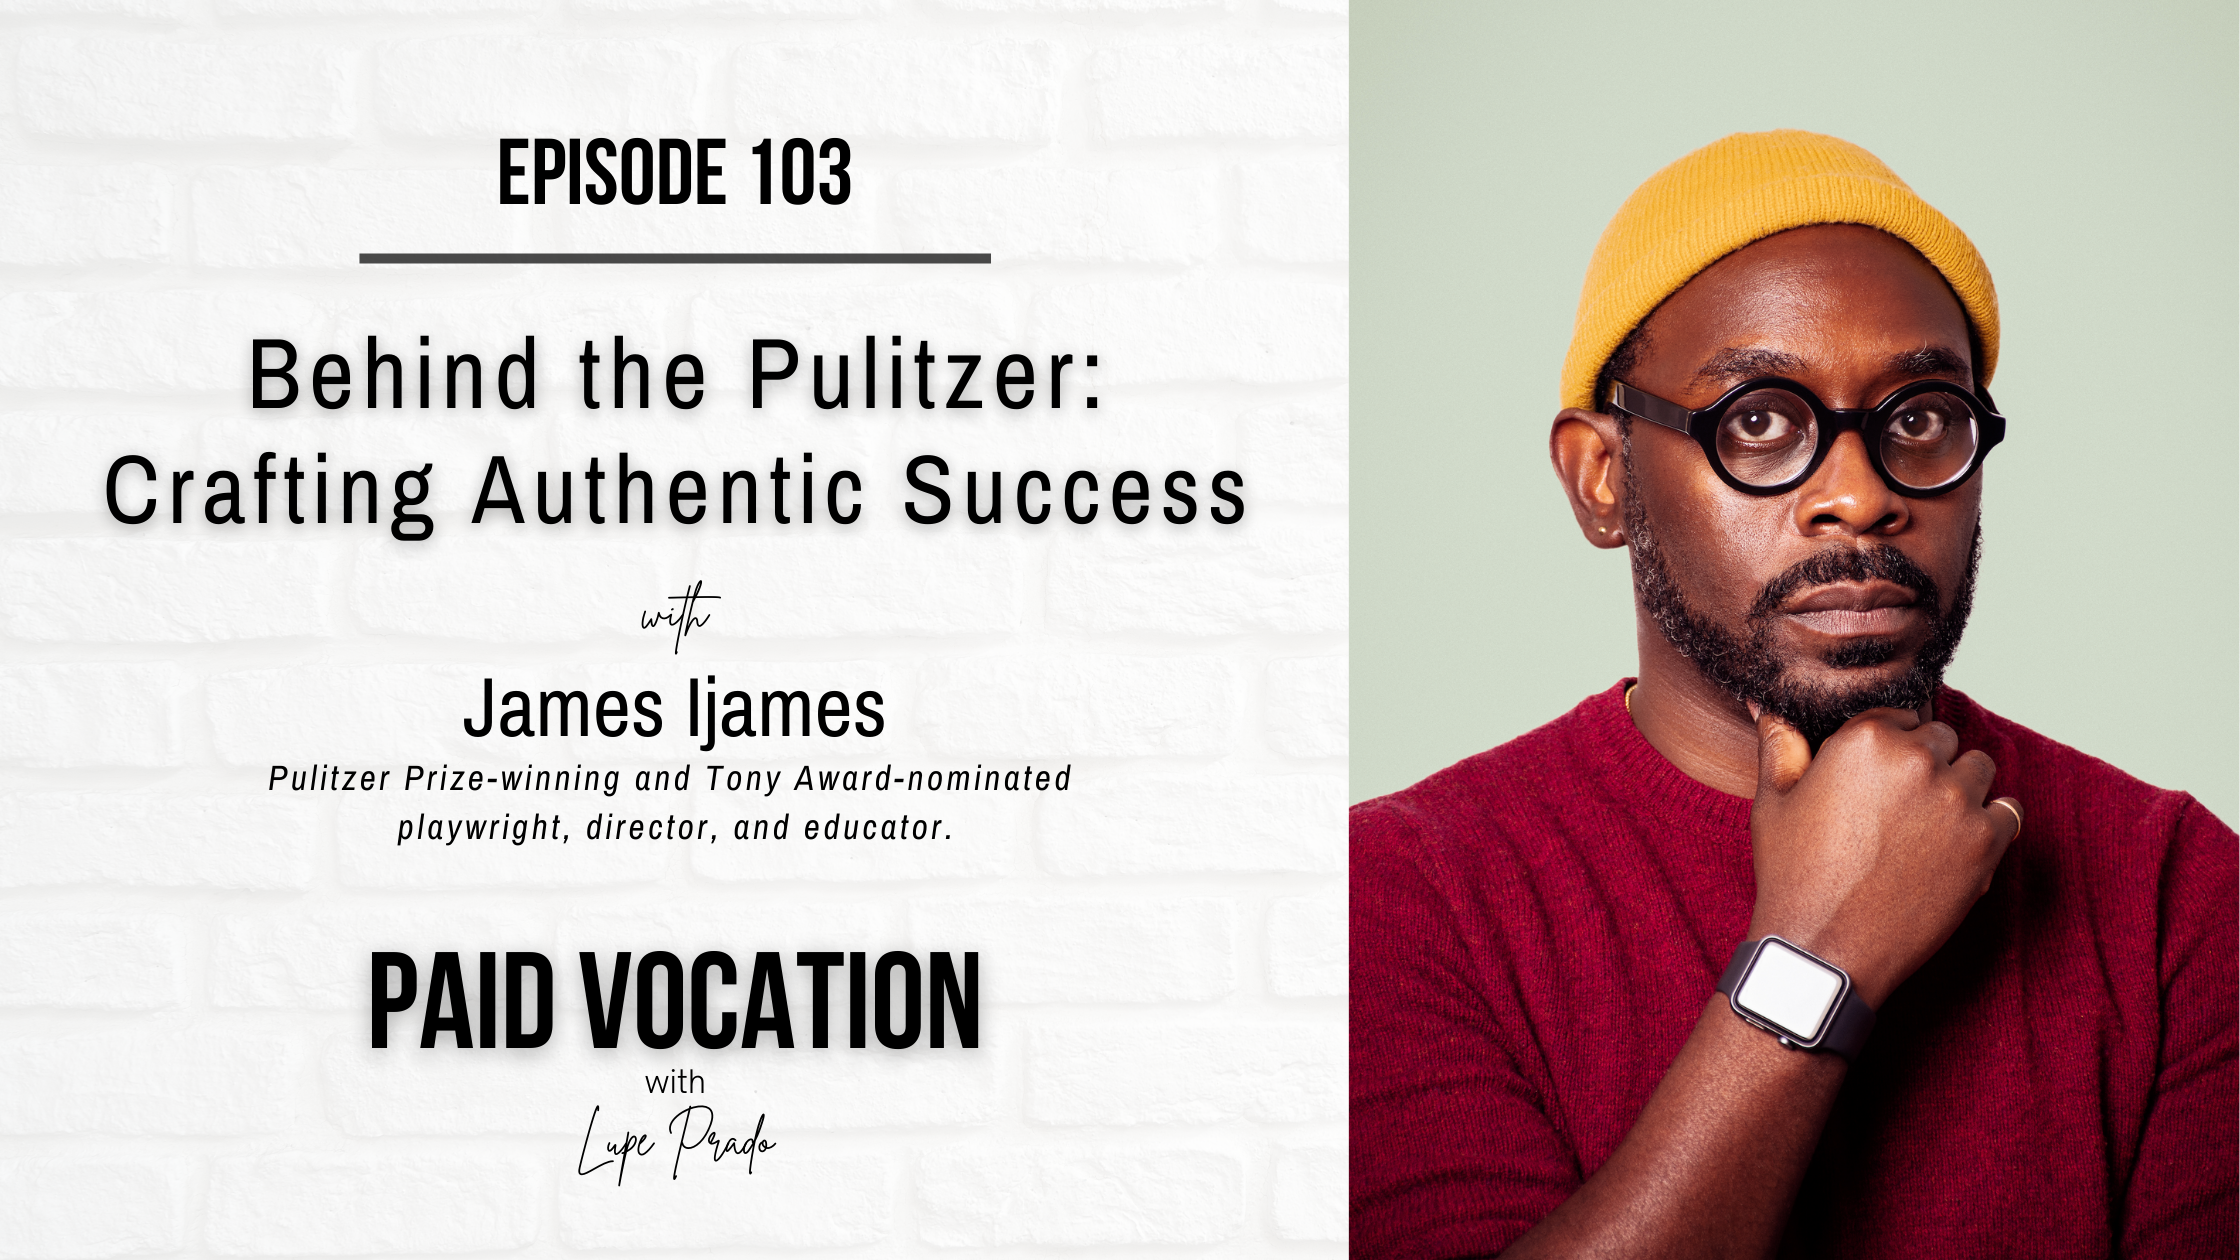 Behind the Pulitzer: Crafting Authentic Success with James Ijames